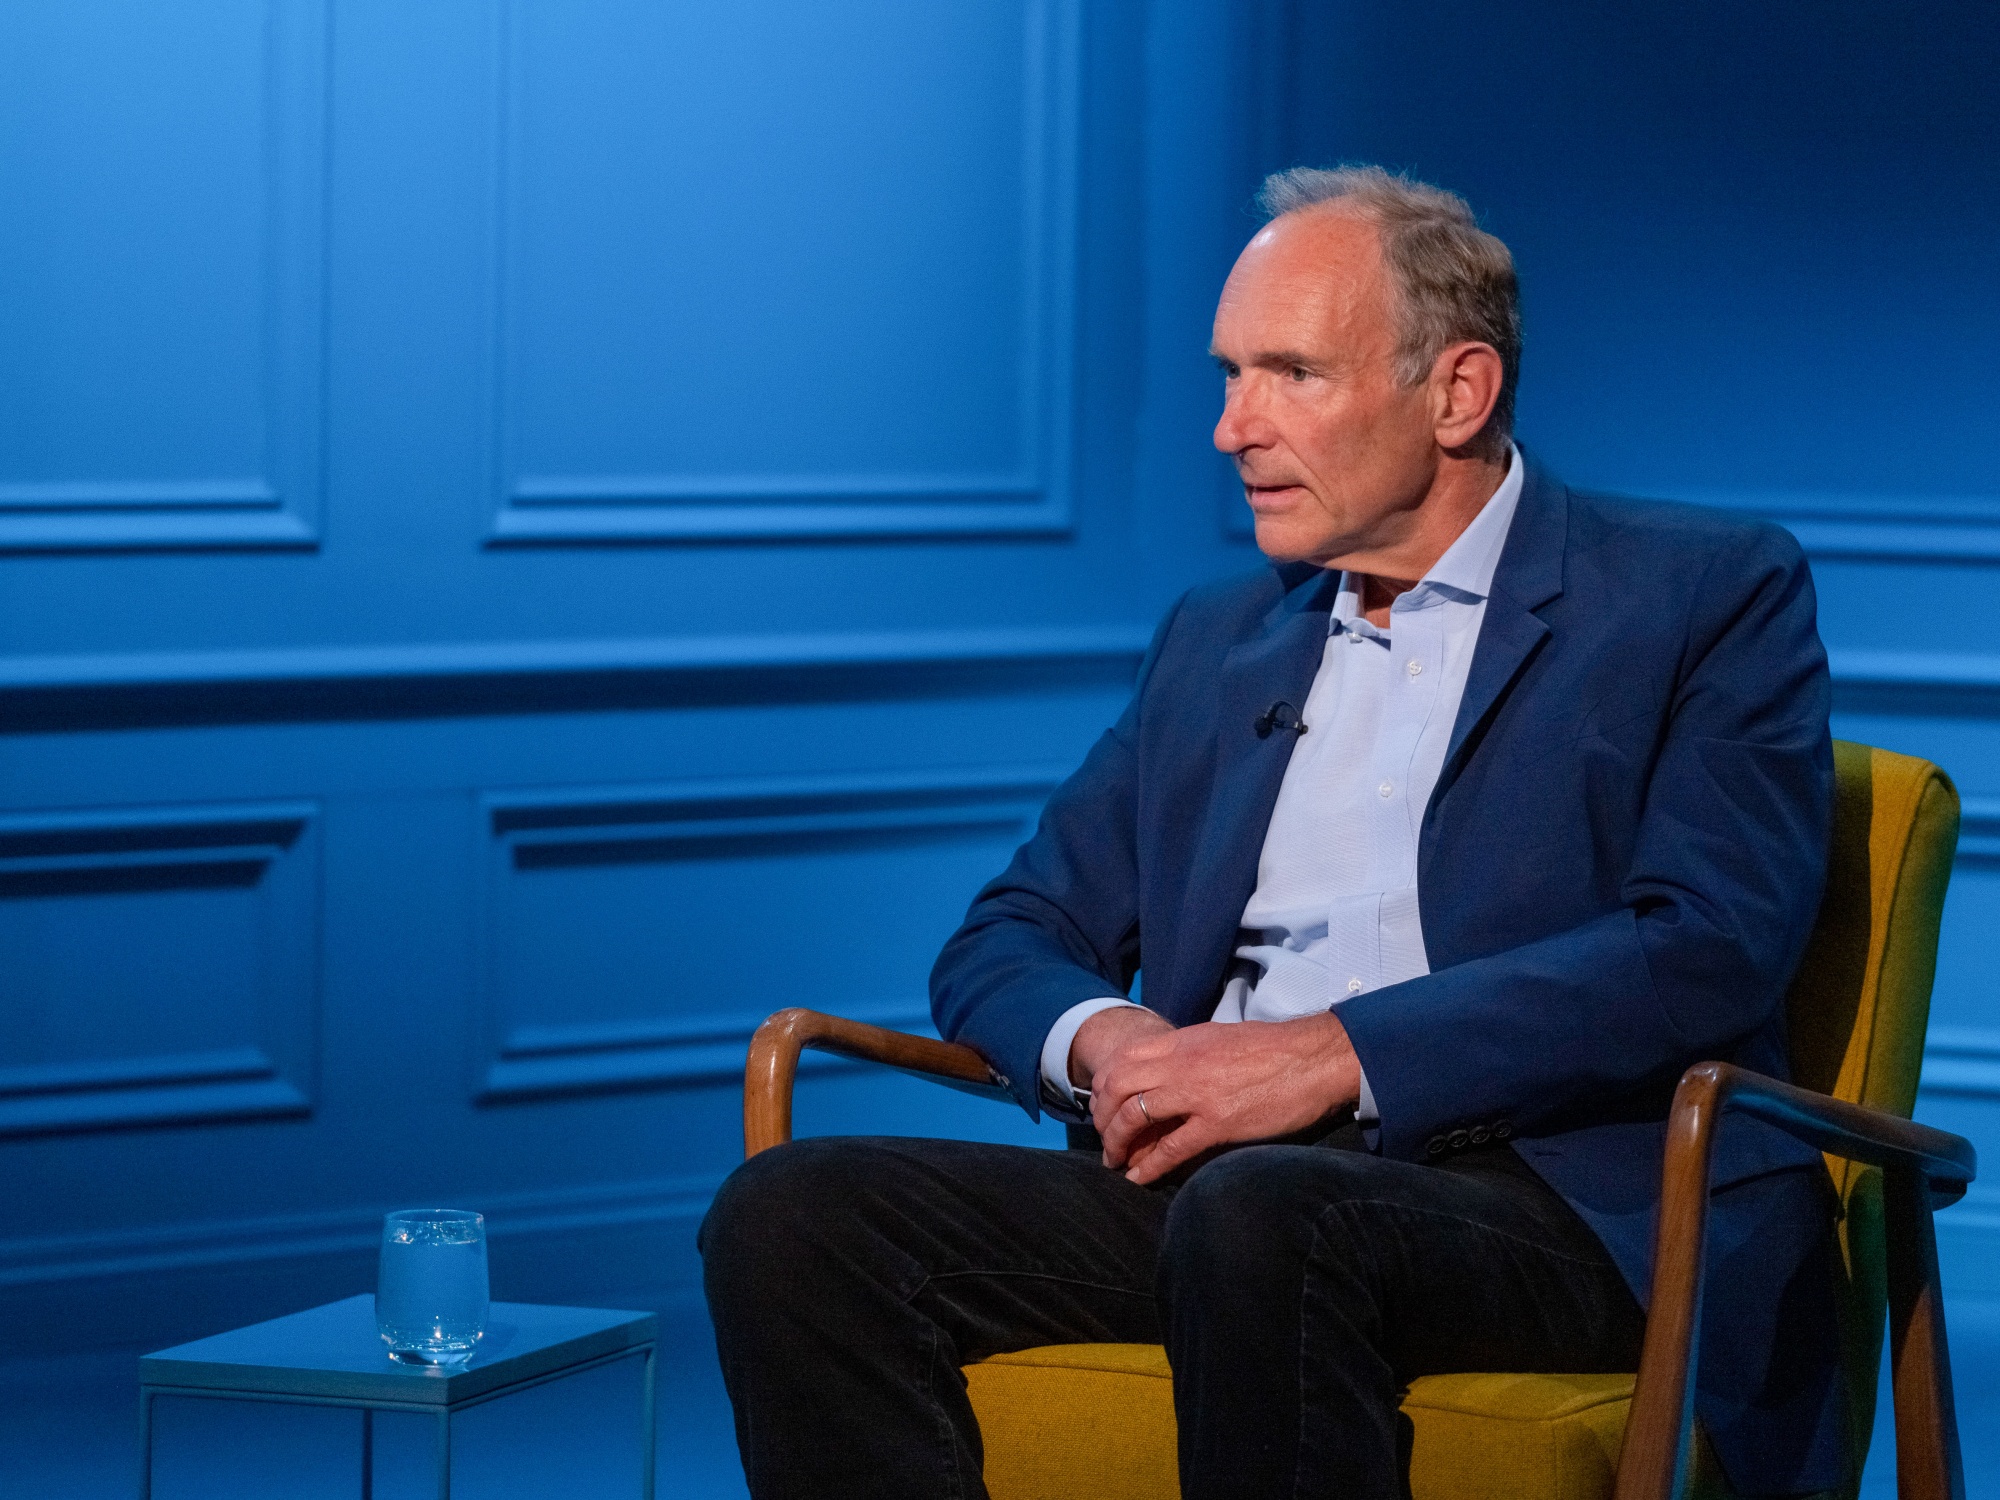 Tim Berners-Lee building a decentralized internet, Mojang opening Minecraft  game code, and more news